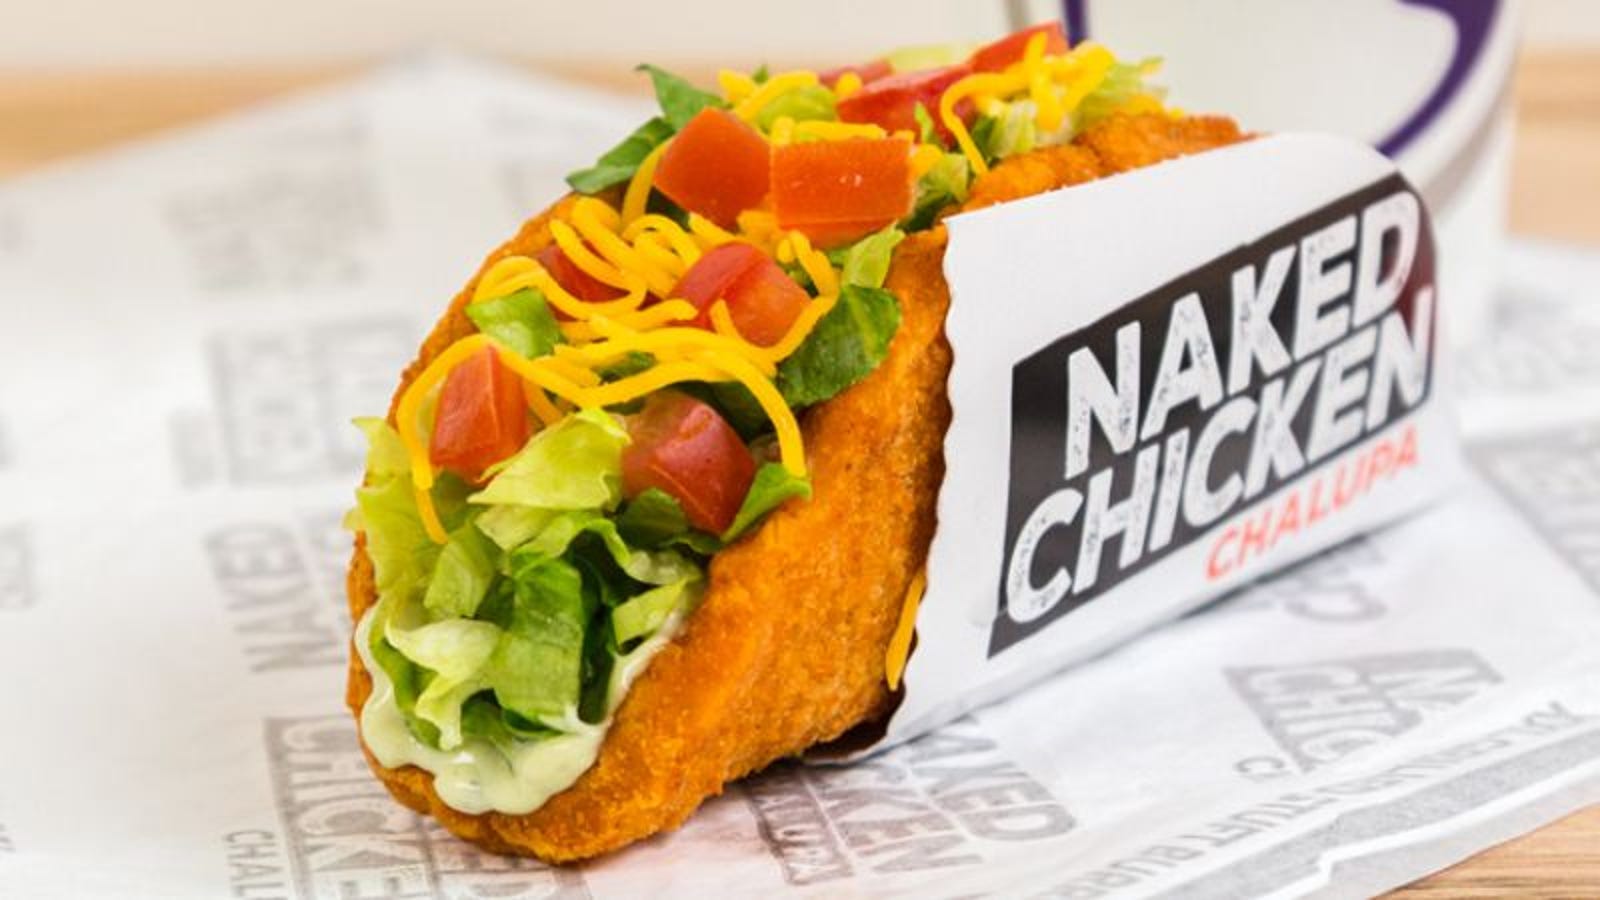 Taco Bell brings back the Naked Chicken Chalupa, adds a 